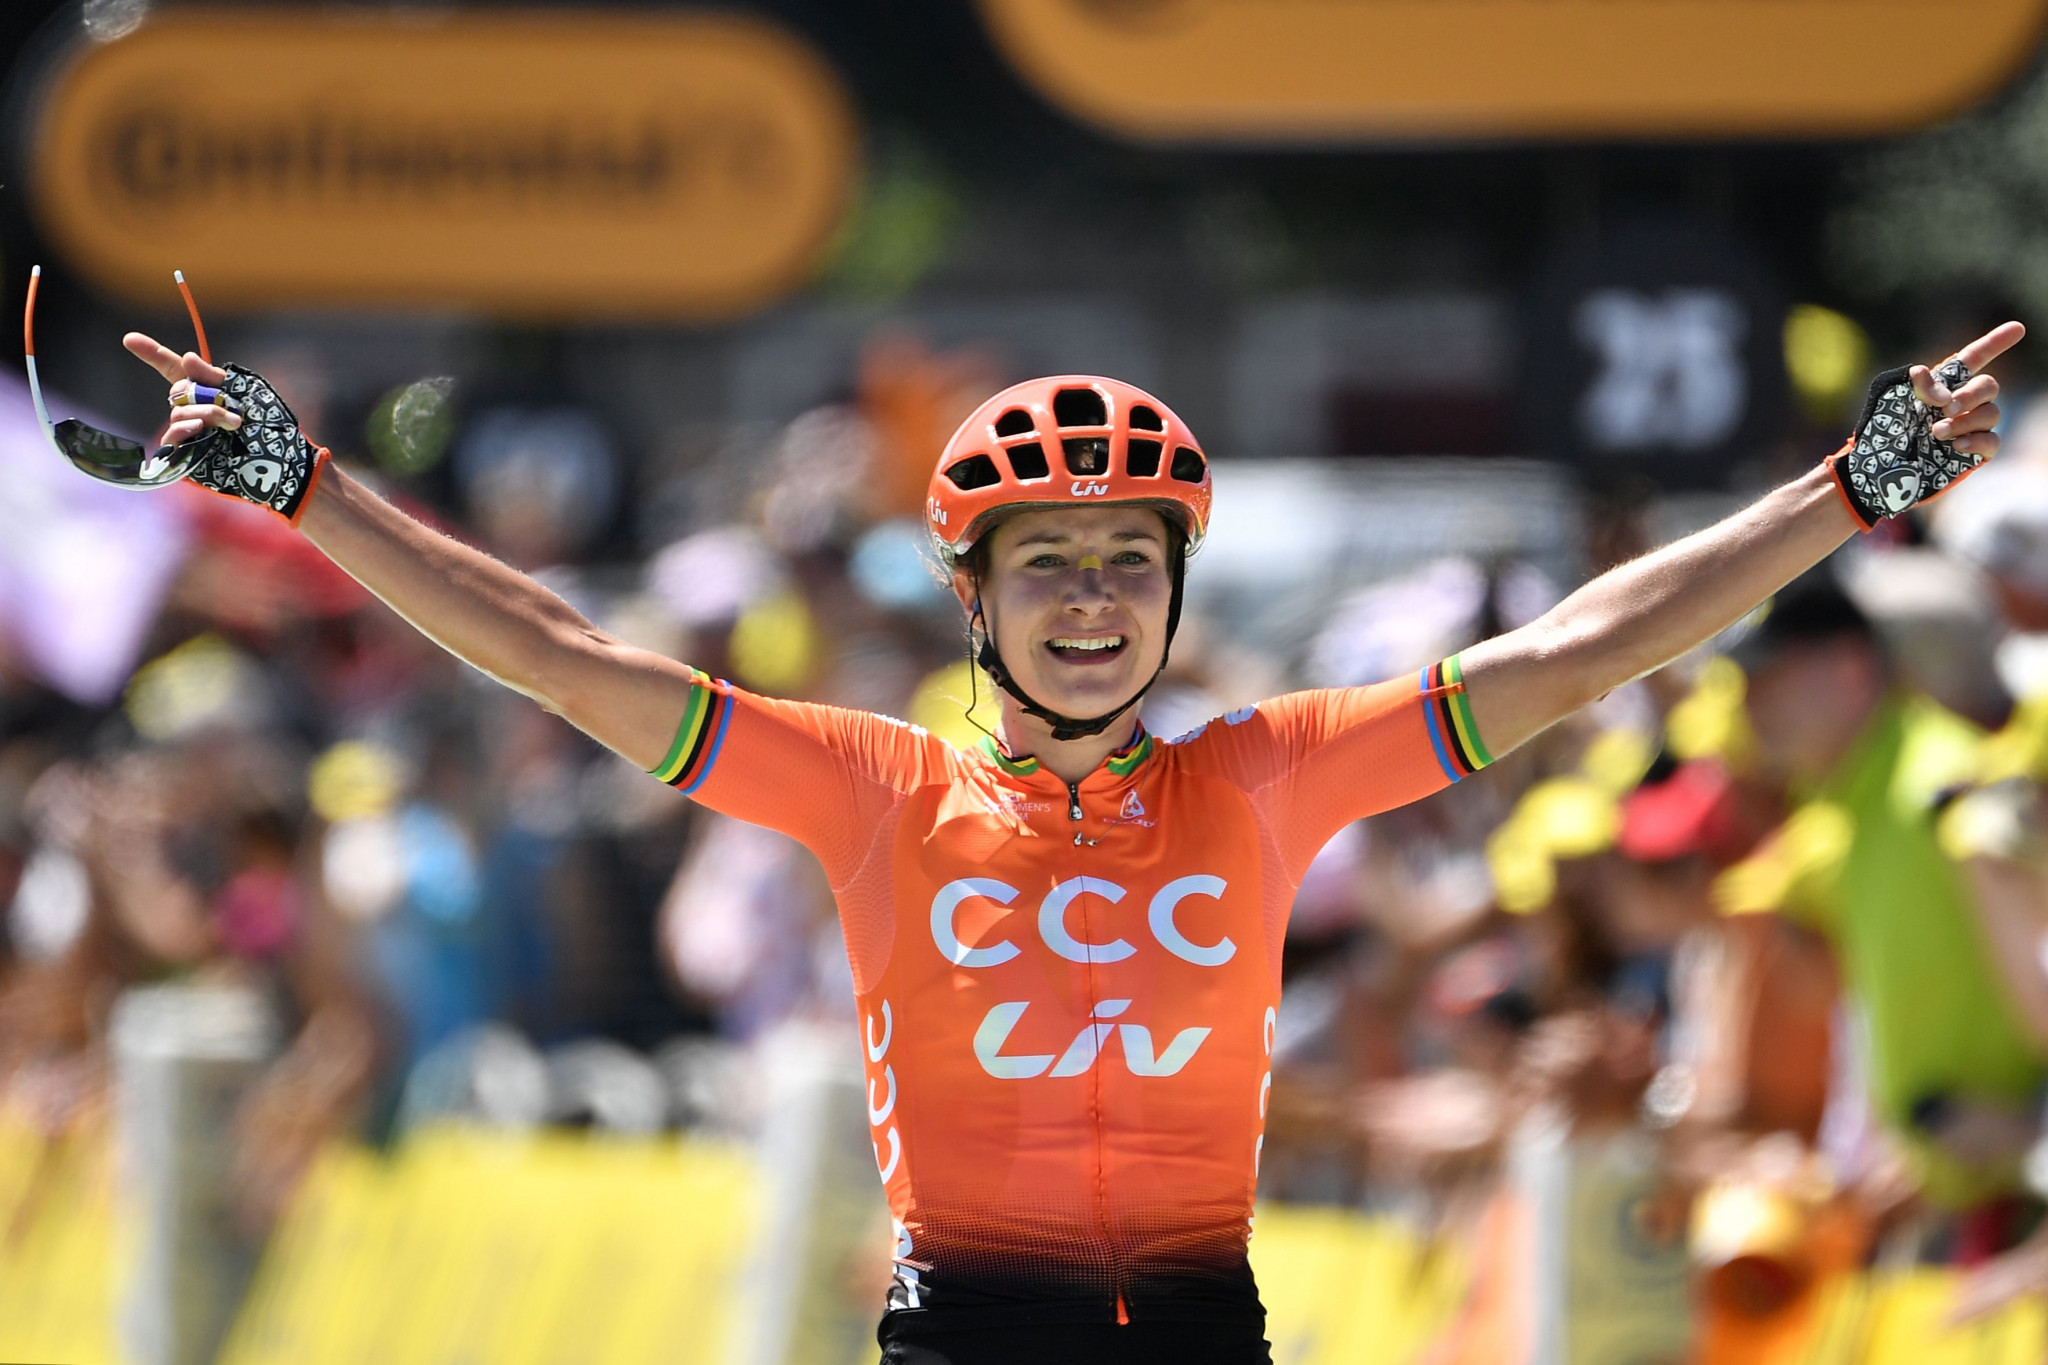 Marianne Vos will carry home hopes of success at the European Road Cycling Championships in Alkmaar ©Getty Images